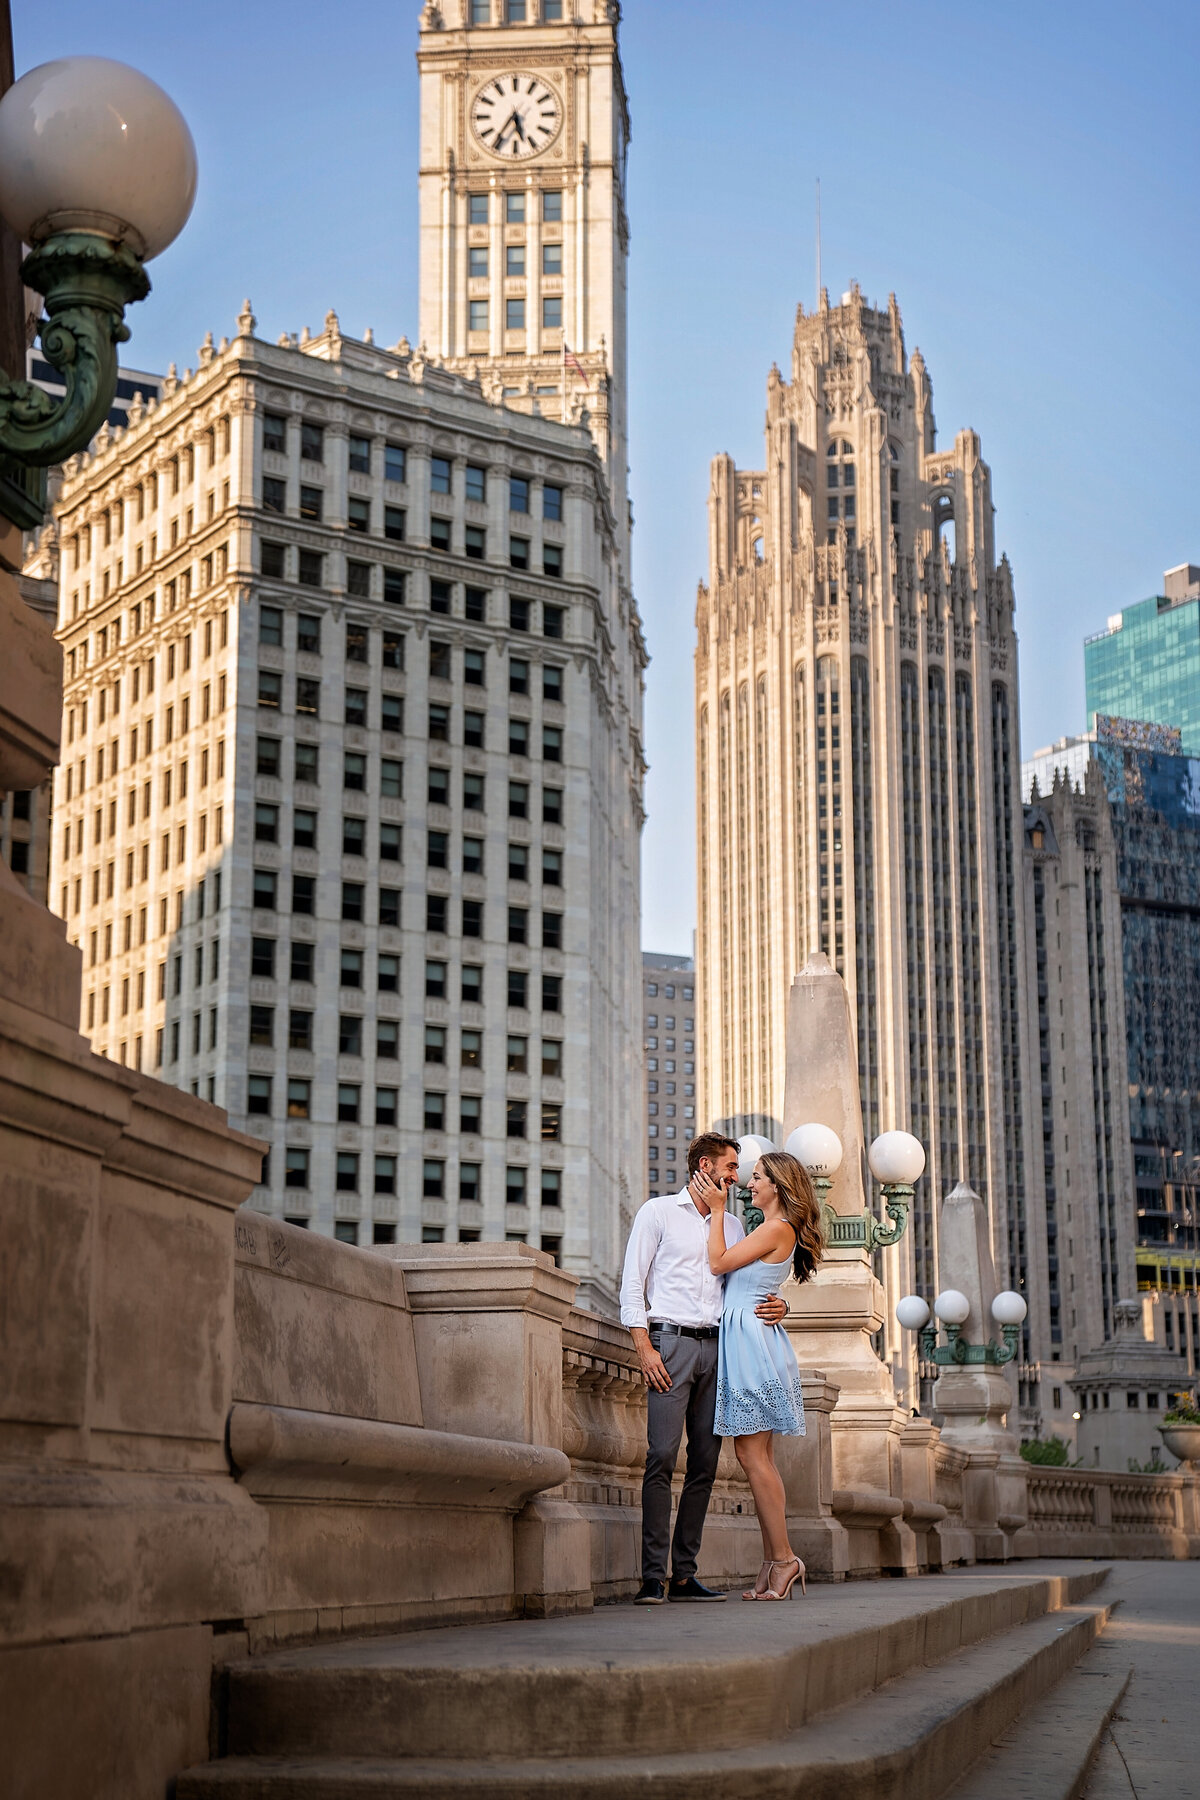 stylish lovers in the heart of Chicago surrounded by  tall skyscrapers